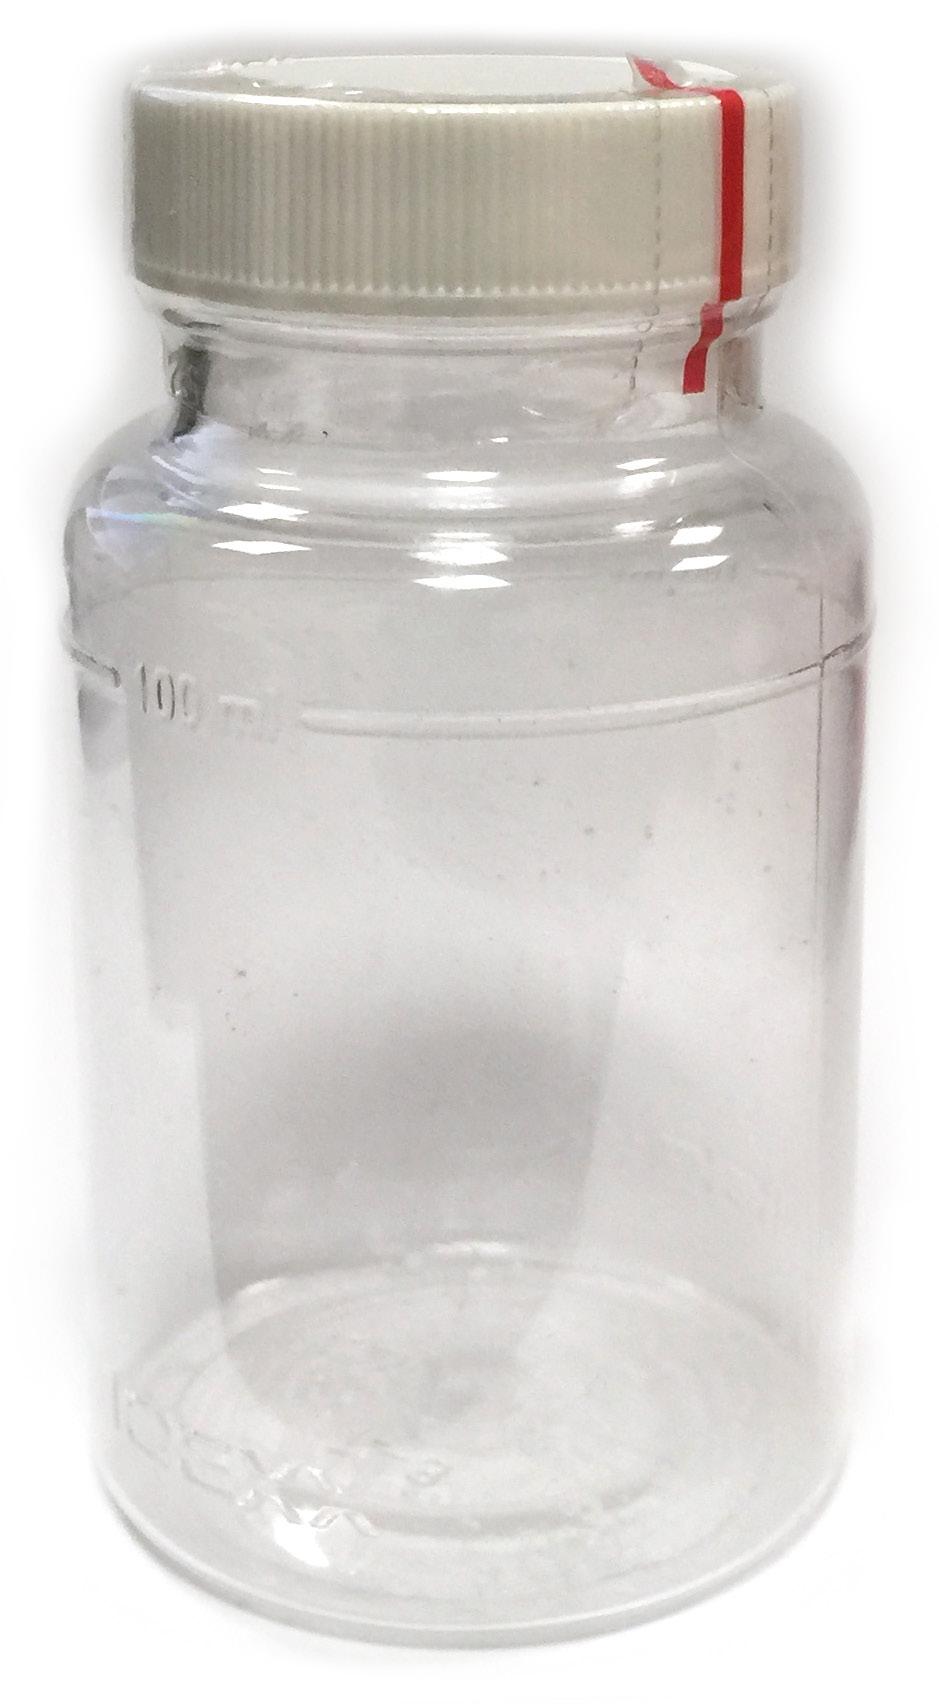 Sterile Water Sample Procedures SUGGESTED PROCEDURE FOR OBTAINING STERILE WATER SAMPLES: Prior to taking the water sample, be sure to have on hand an adequate supply of sterile bottles (as shown in